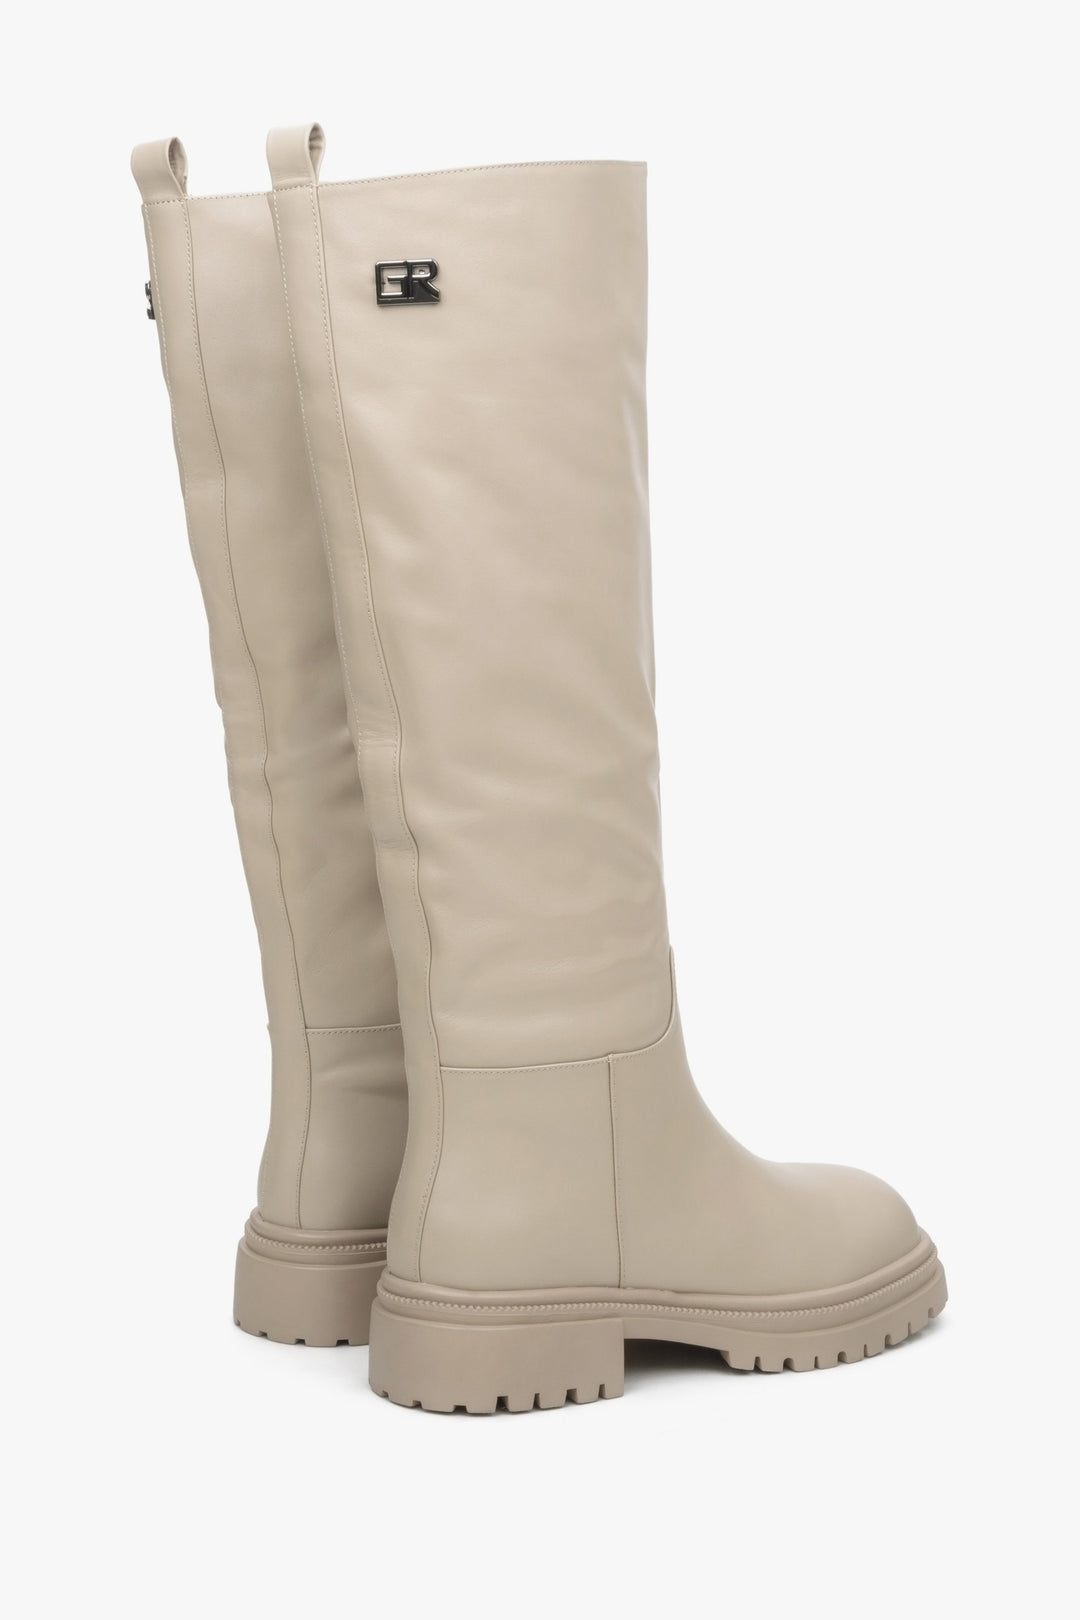 Women's boots with a wide shaft in beige. Estro - heel counter and side profile of the shoe.